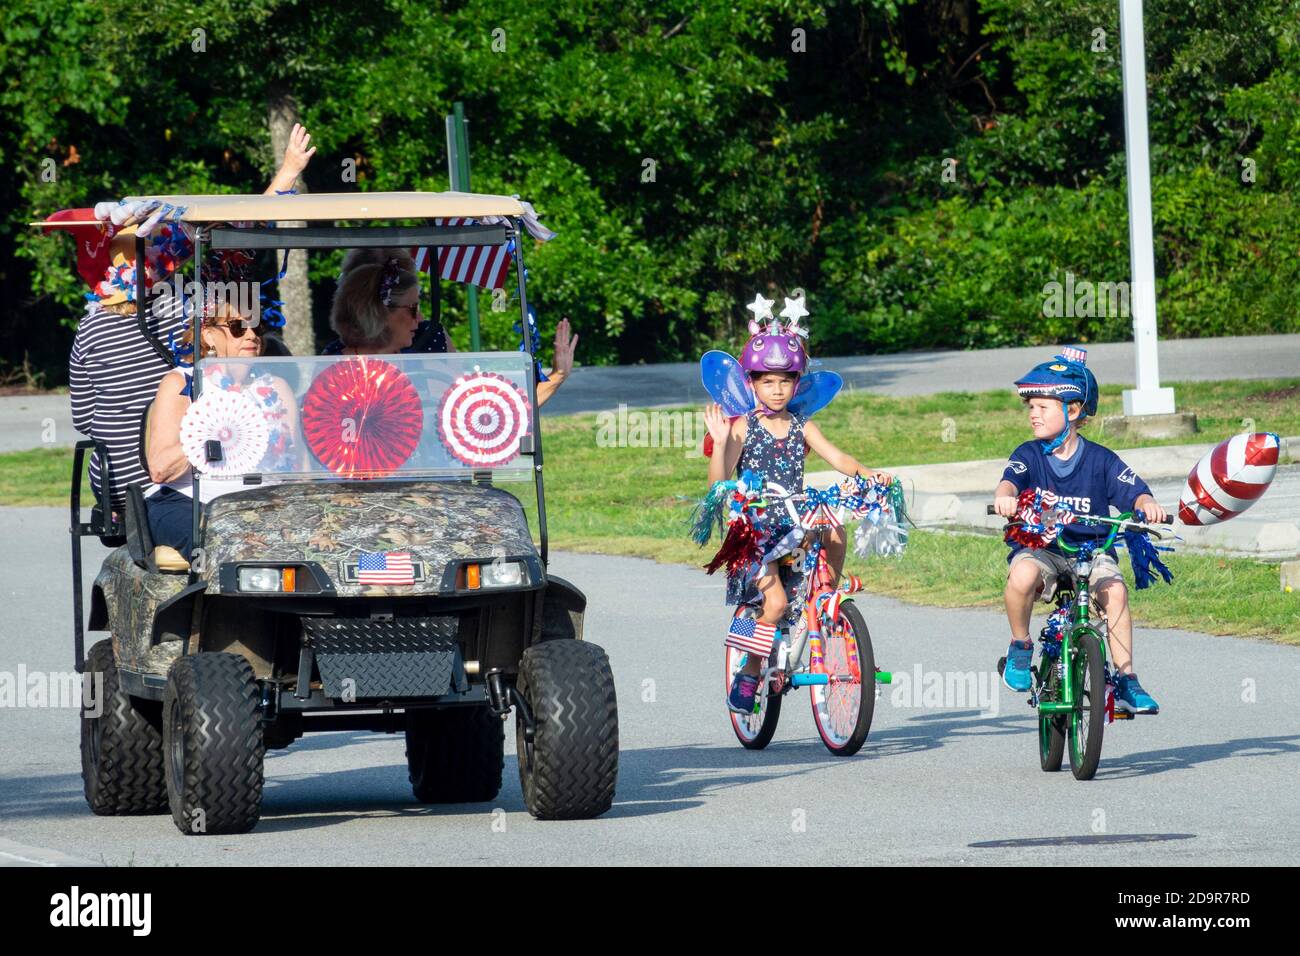 Decorated golf carts and costumed bicyclists ride down the road during the annual Independence Day parade July 4, 2019 in Sullivan's Island, South Carolina. The tiny affluent Sea Island beach community across from Charleston holds an outsized golf cart parade featuring more than 75 decorated carts. Stock Photo